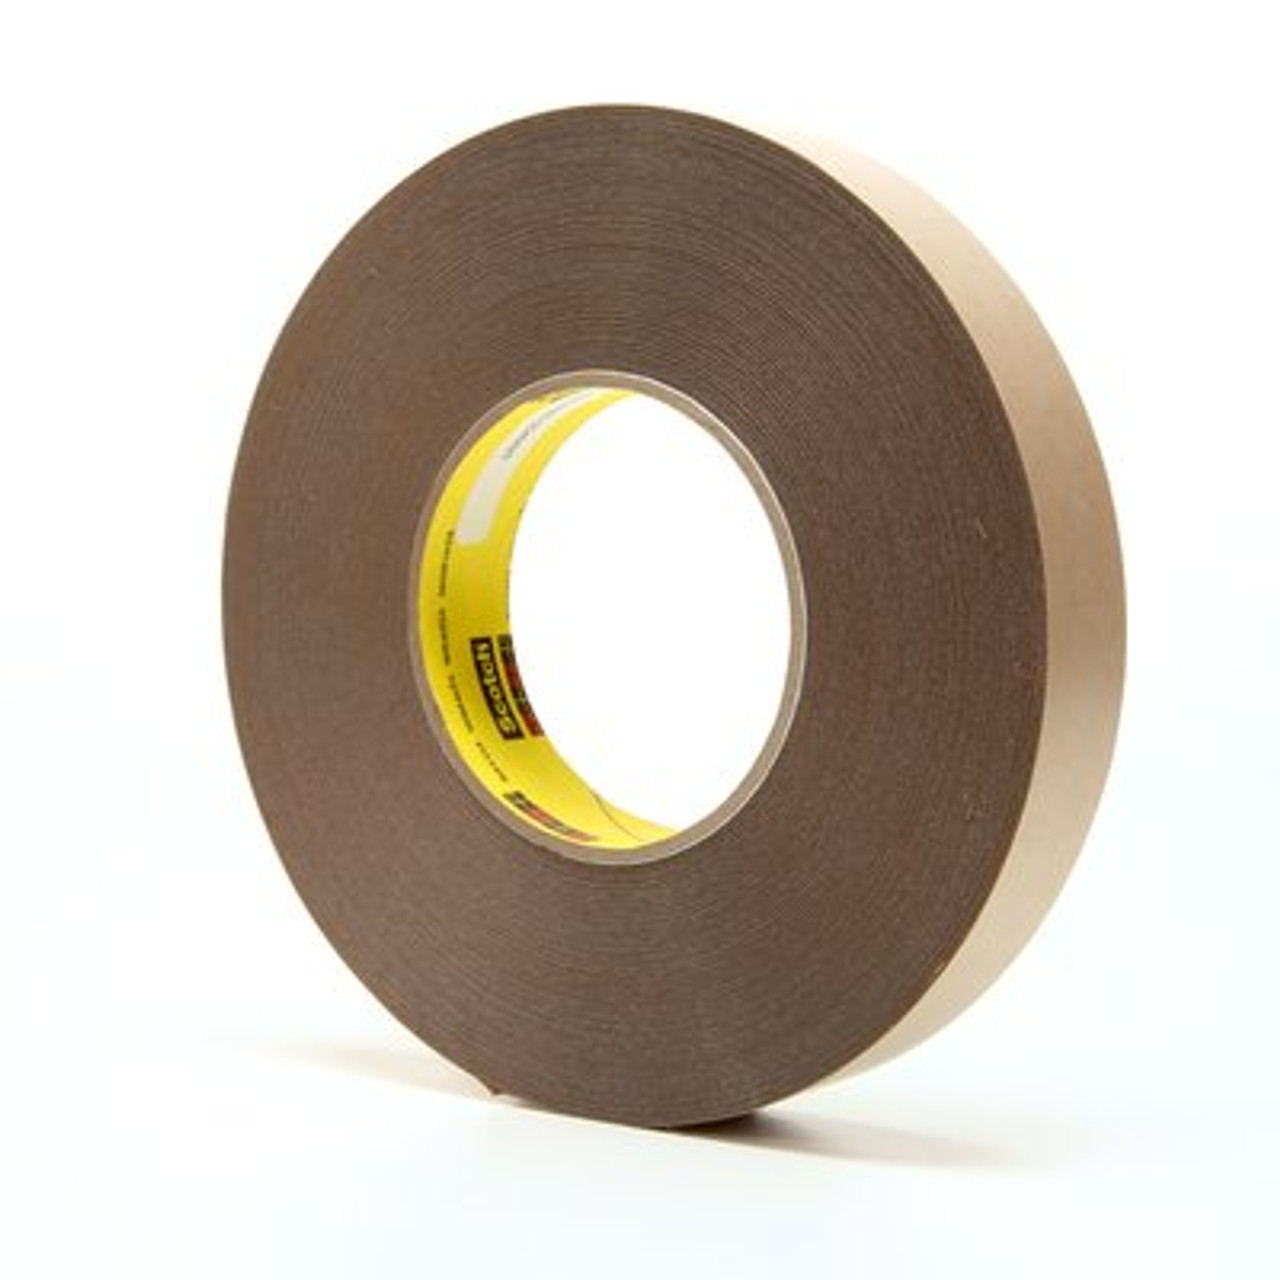 3M™ Removable Repositionable Tape 9425, Clear, 1 in x 72 yd, 5.8